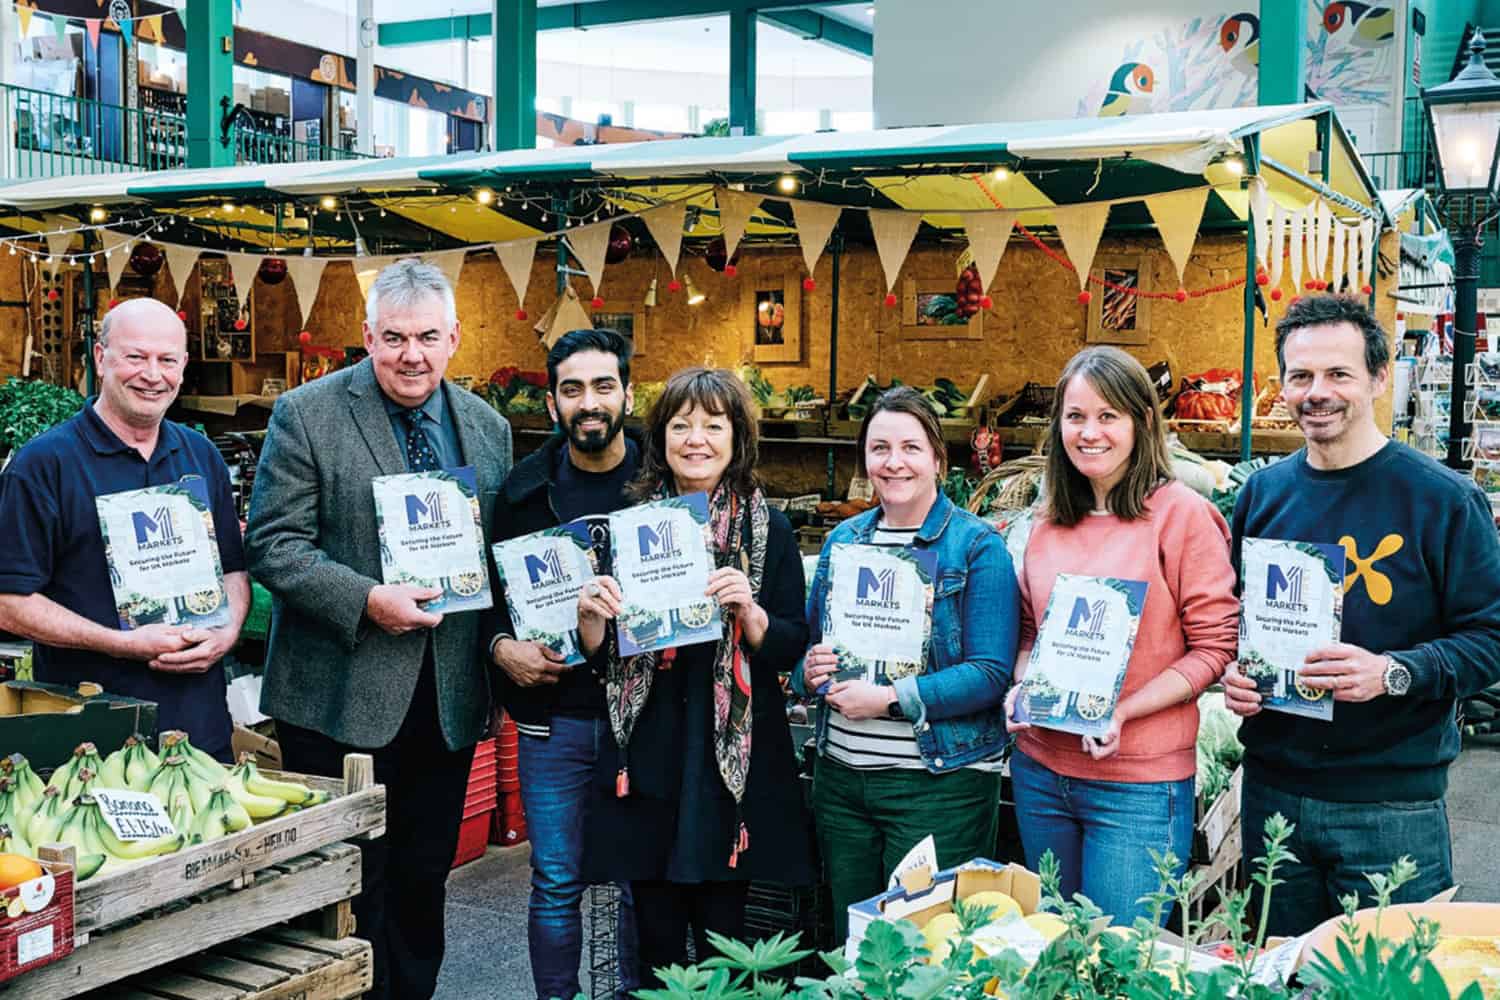 David Preston with colleagues celebrating the launch of NABMA's Markets first campaign at Shrewsbury Market